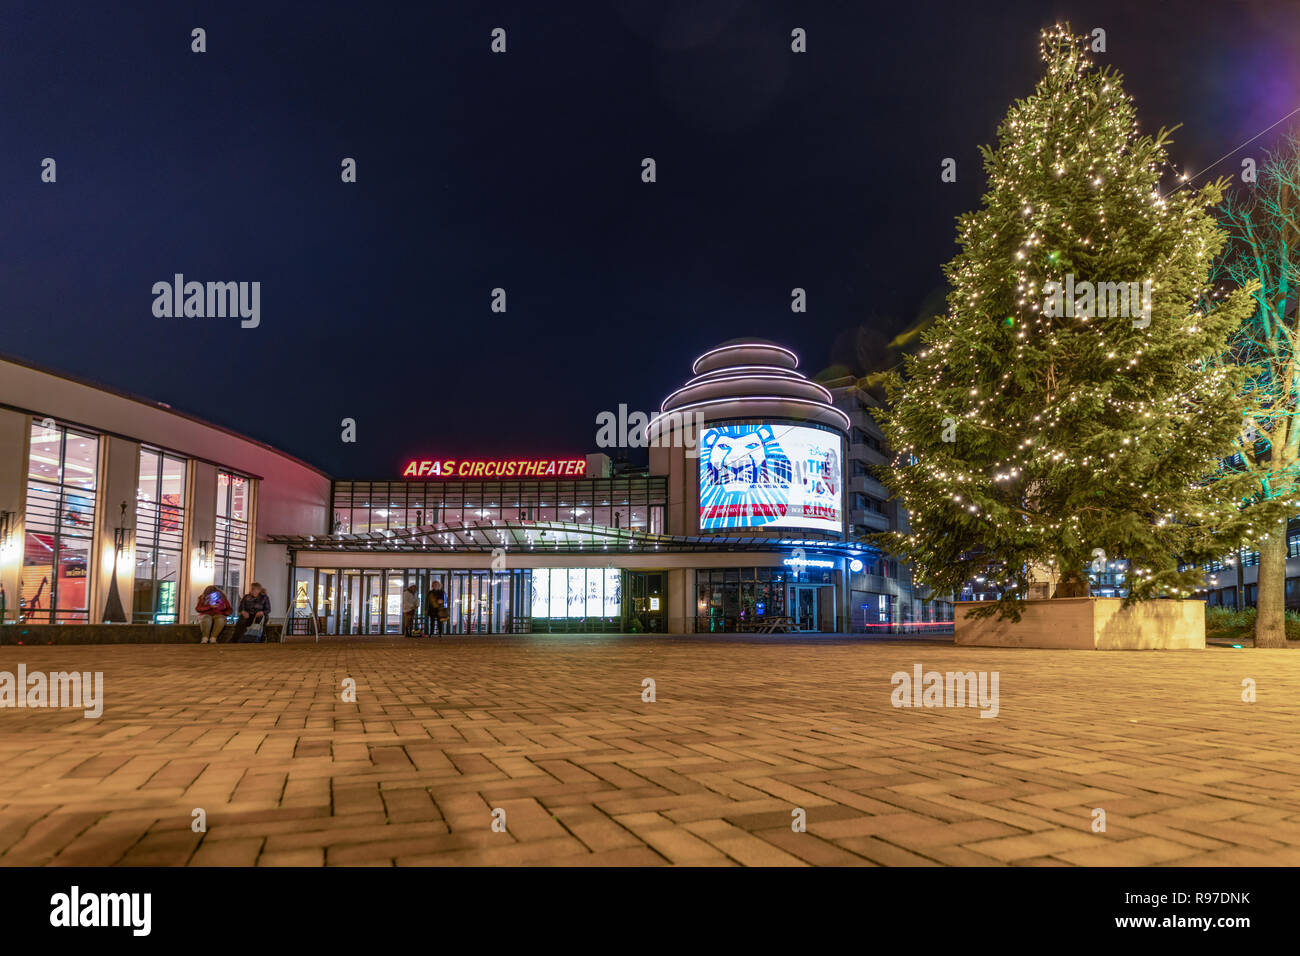 SCHEVENINGEN, 19 December 2018 - Night Christmas decoration of the Circus Theater in The Hague, Netherlands Stock Photo